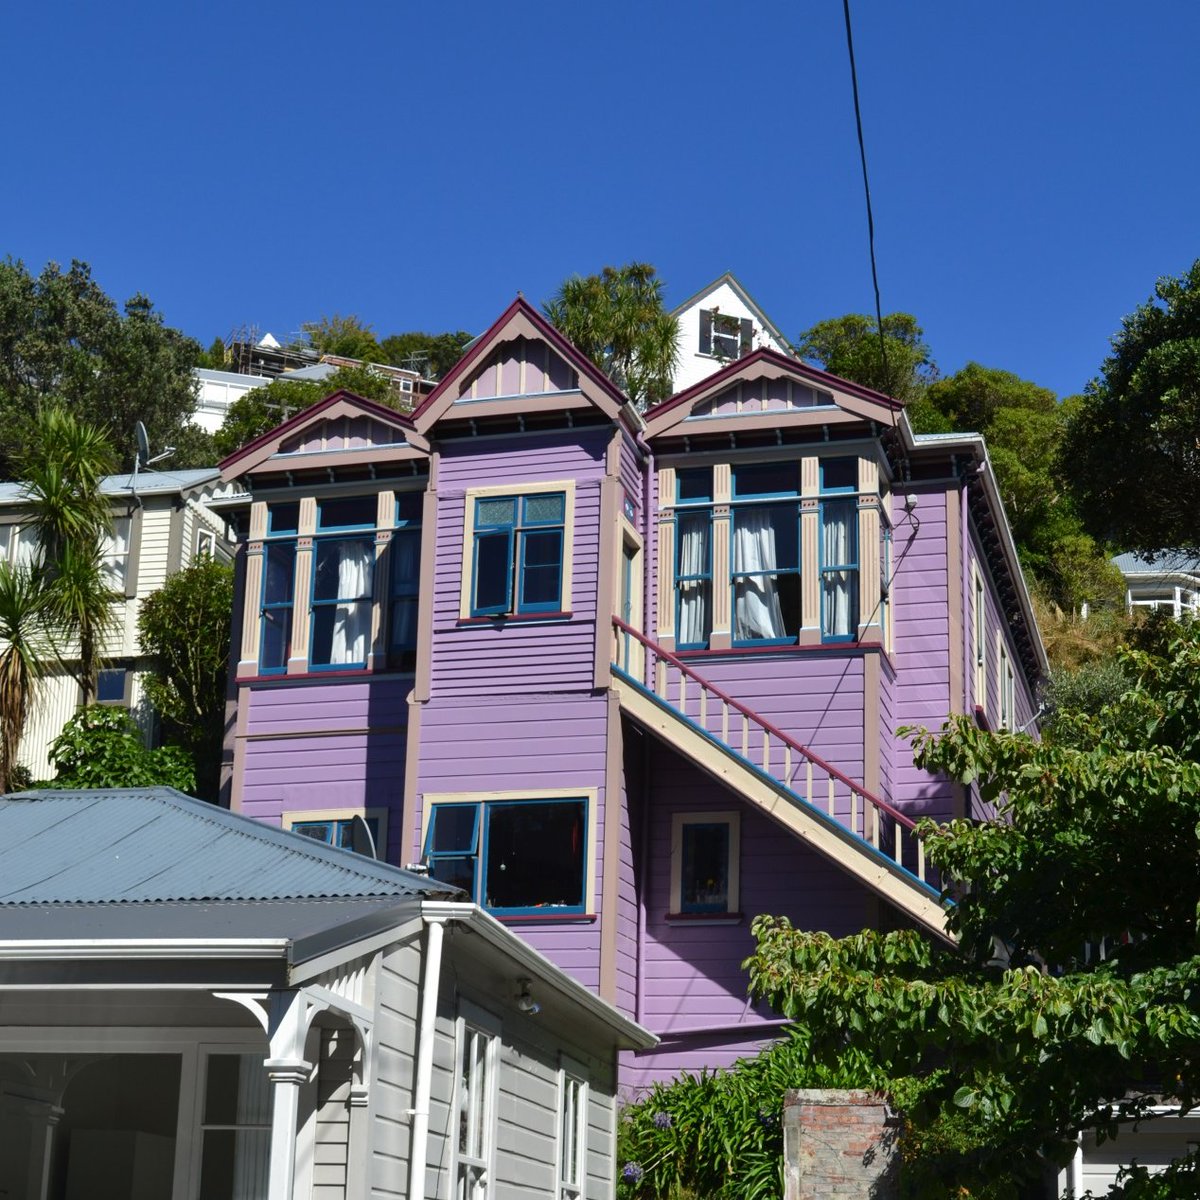 3 Entrance Street, Aro Valley. Built in 1904.Has "modest aesthetic value" (AKA: it's purple) though that was "lessened somewhat" by renovations in the late 1980s. "No events or persons of any note are associated with this place".